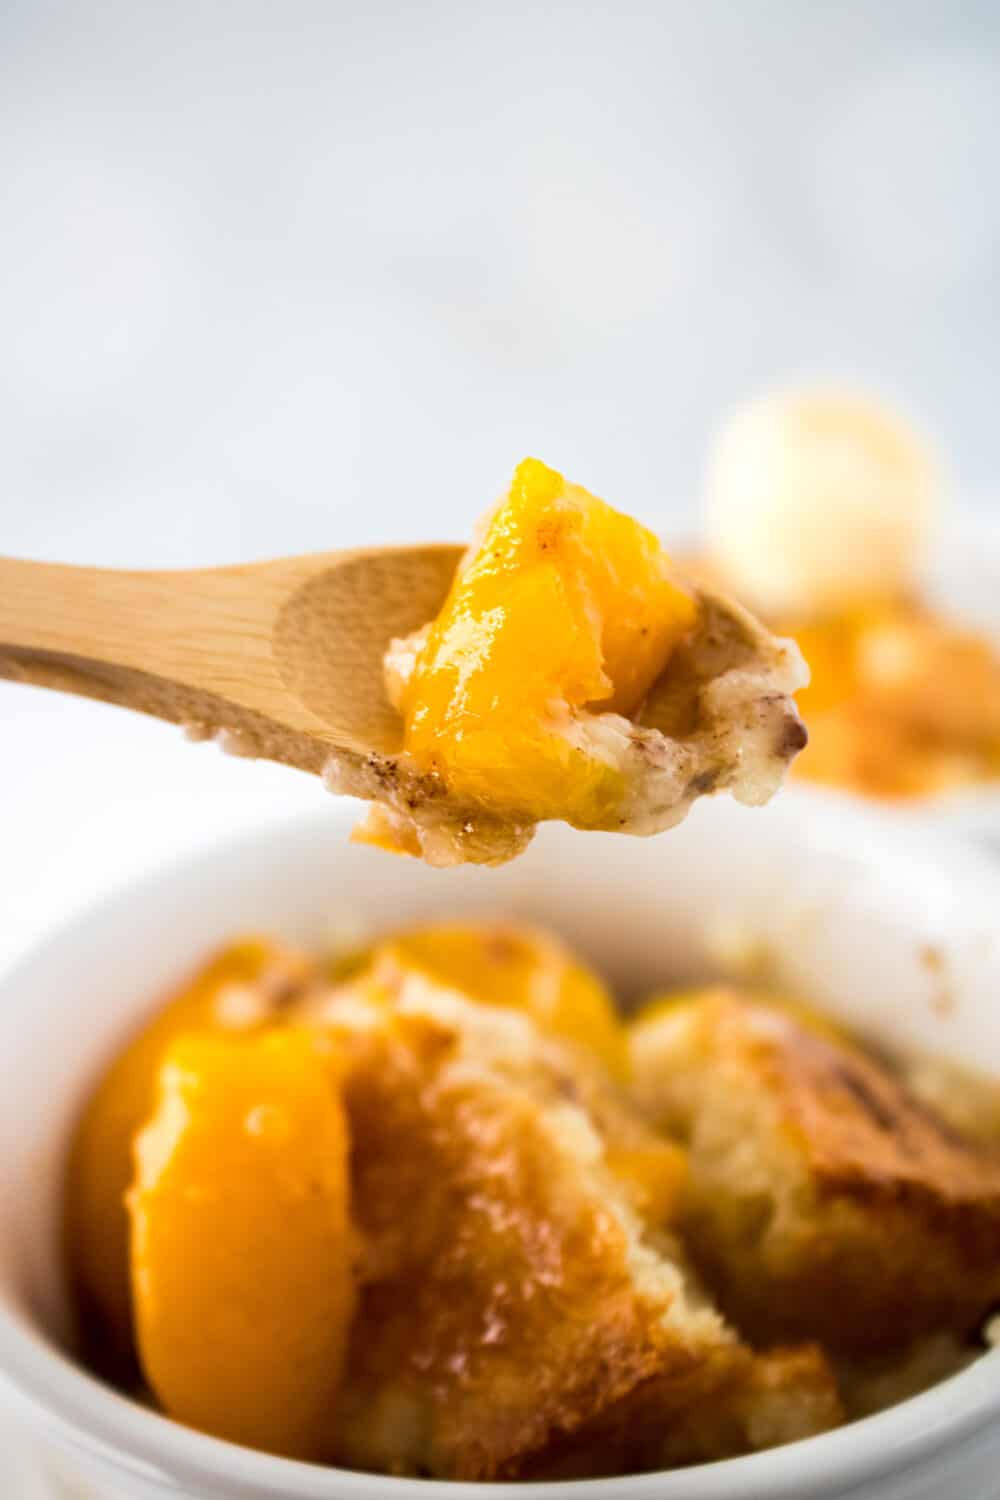 Folks, this is the ONLY Southern Peach Cobbler recipe you’ll ever need. If you want to know what sweet, delicious southern baking tastes like… this peach cobbler is your answer! Tons of flavor made with care and love.